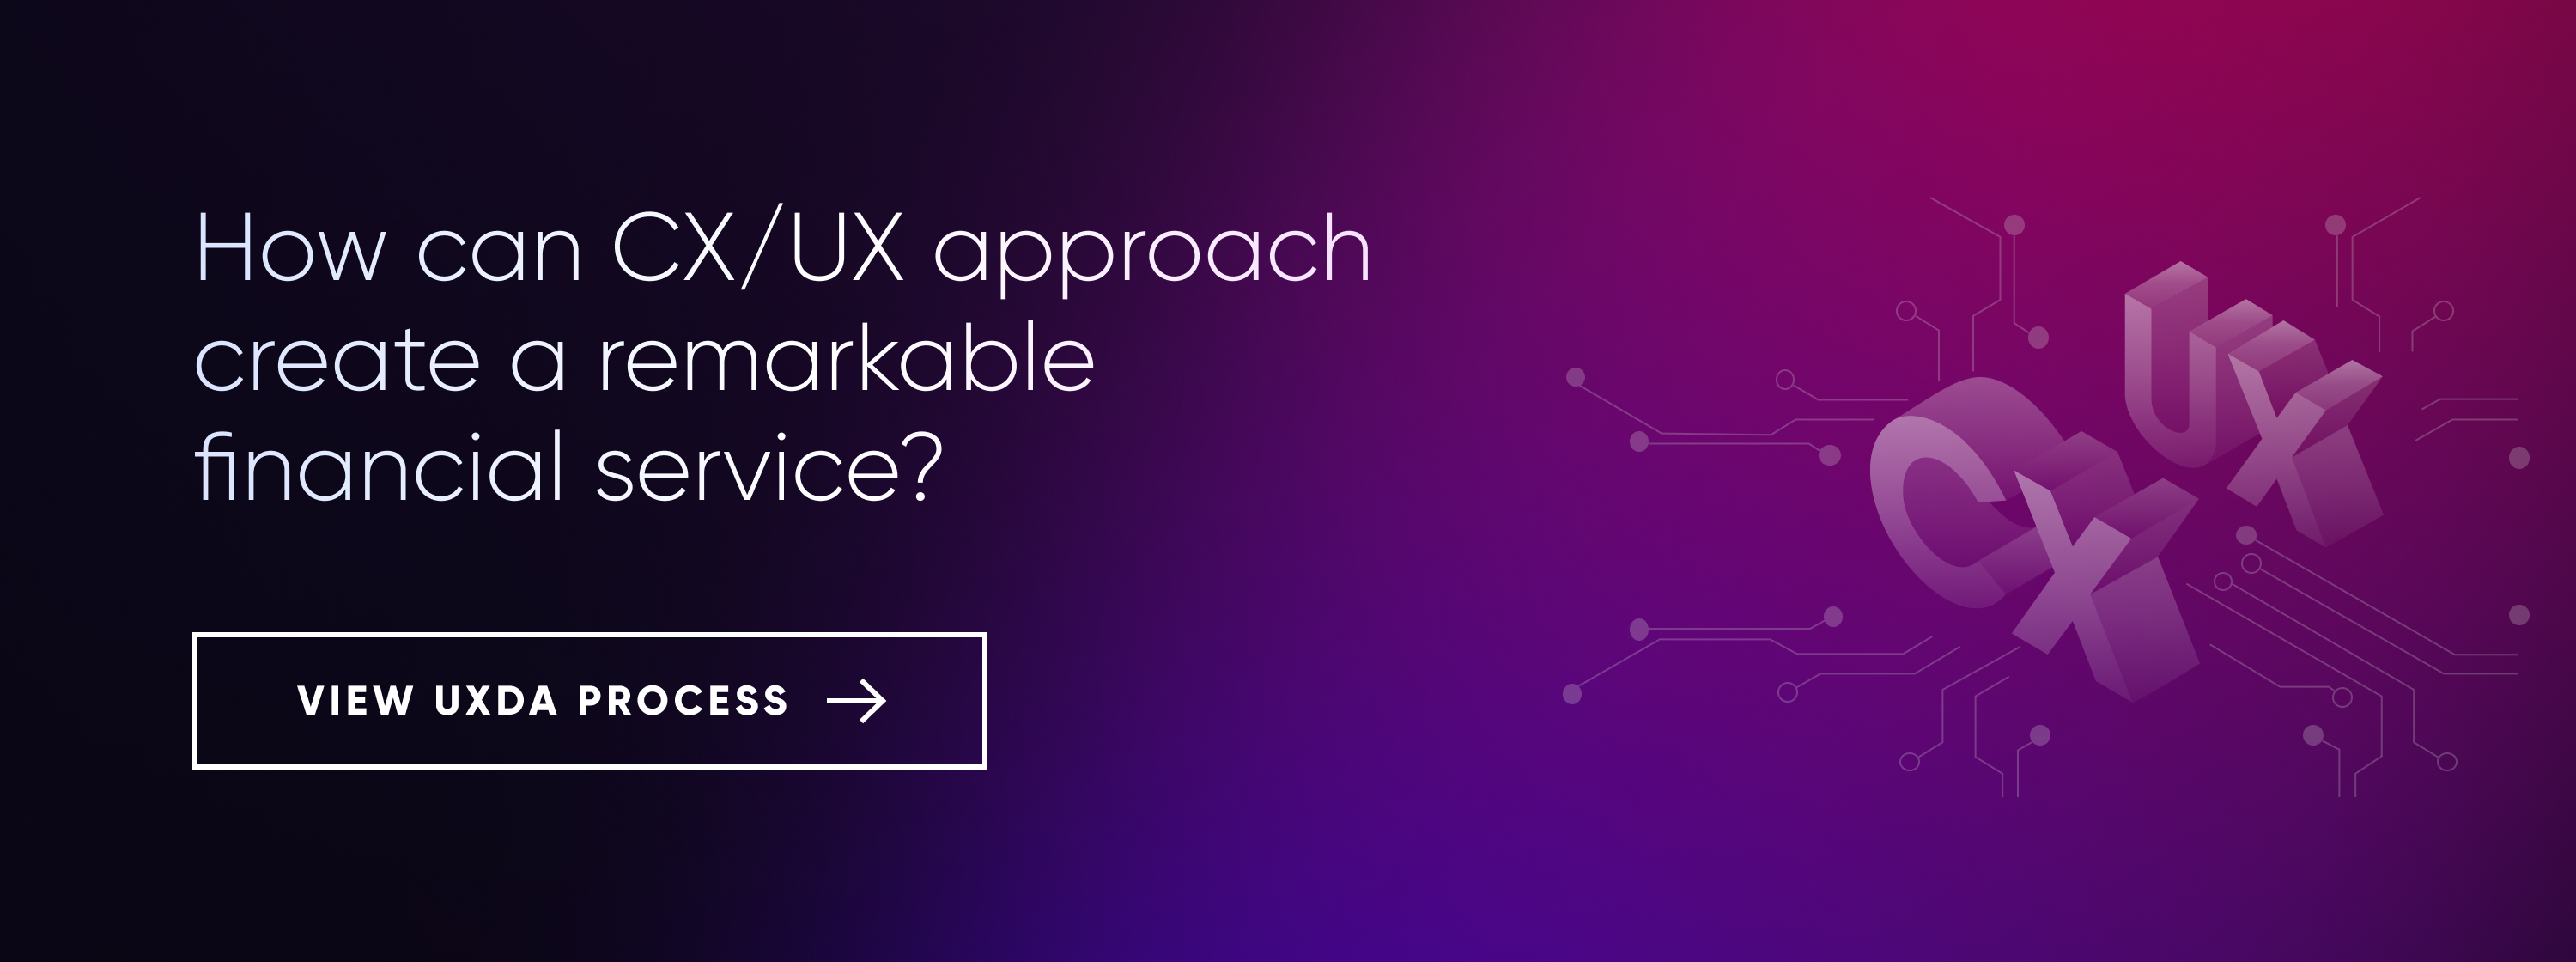 UXDA process CX UX methodology approach remarkable financial service